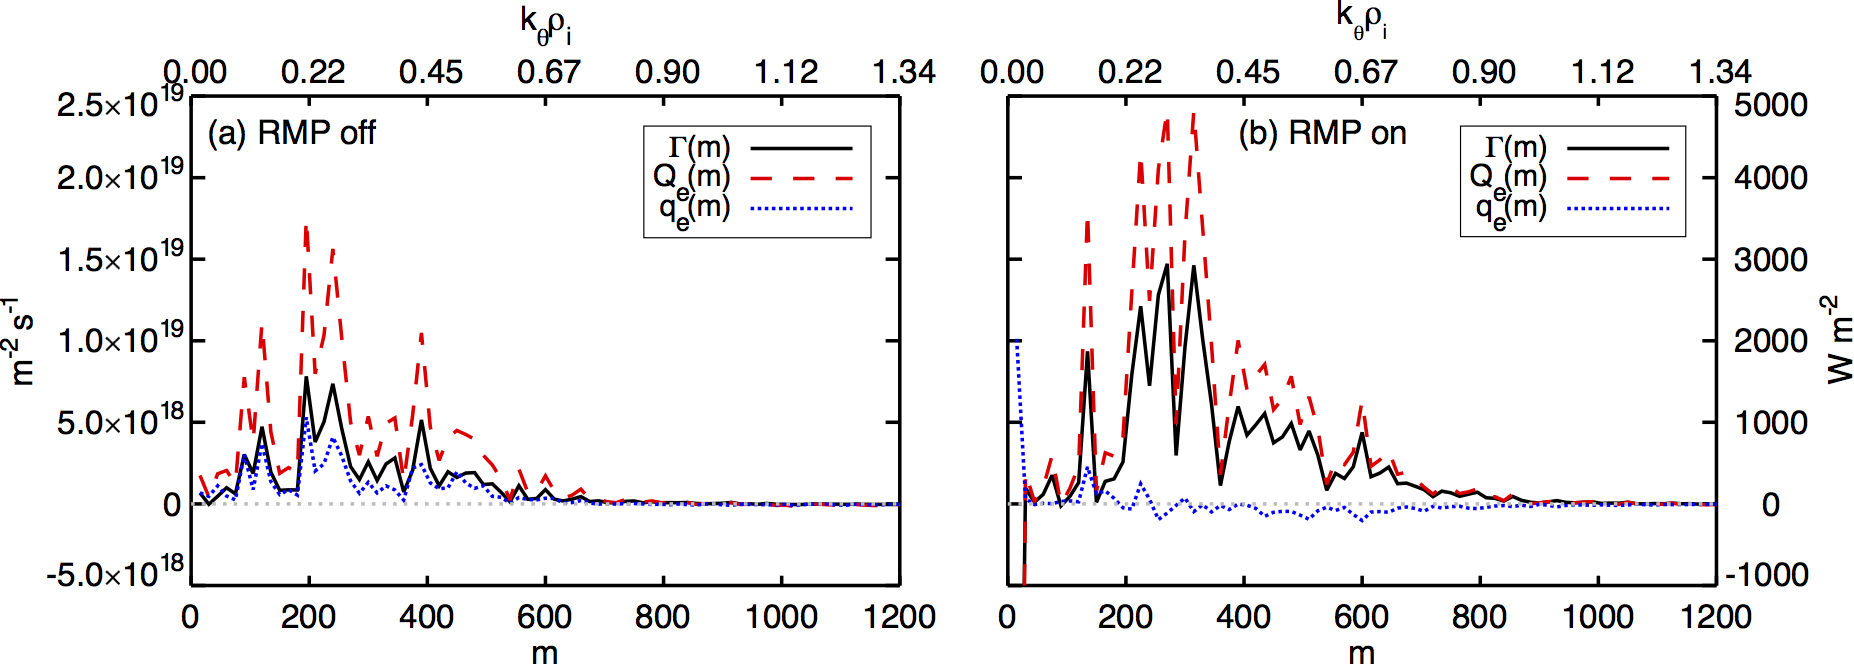 Contributions to particle flux, electron energy flux and electron heat flux vs. poloidal mode number at normalized poloidal flux $\psi_N=0.97$ (a) without RMPs and (b) with RMPs.